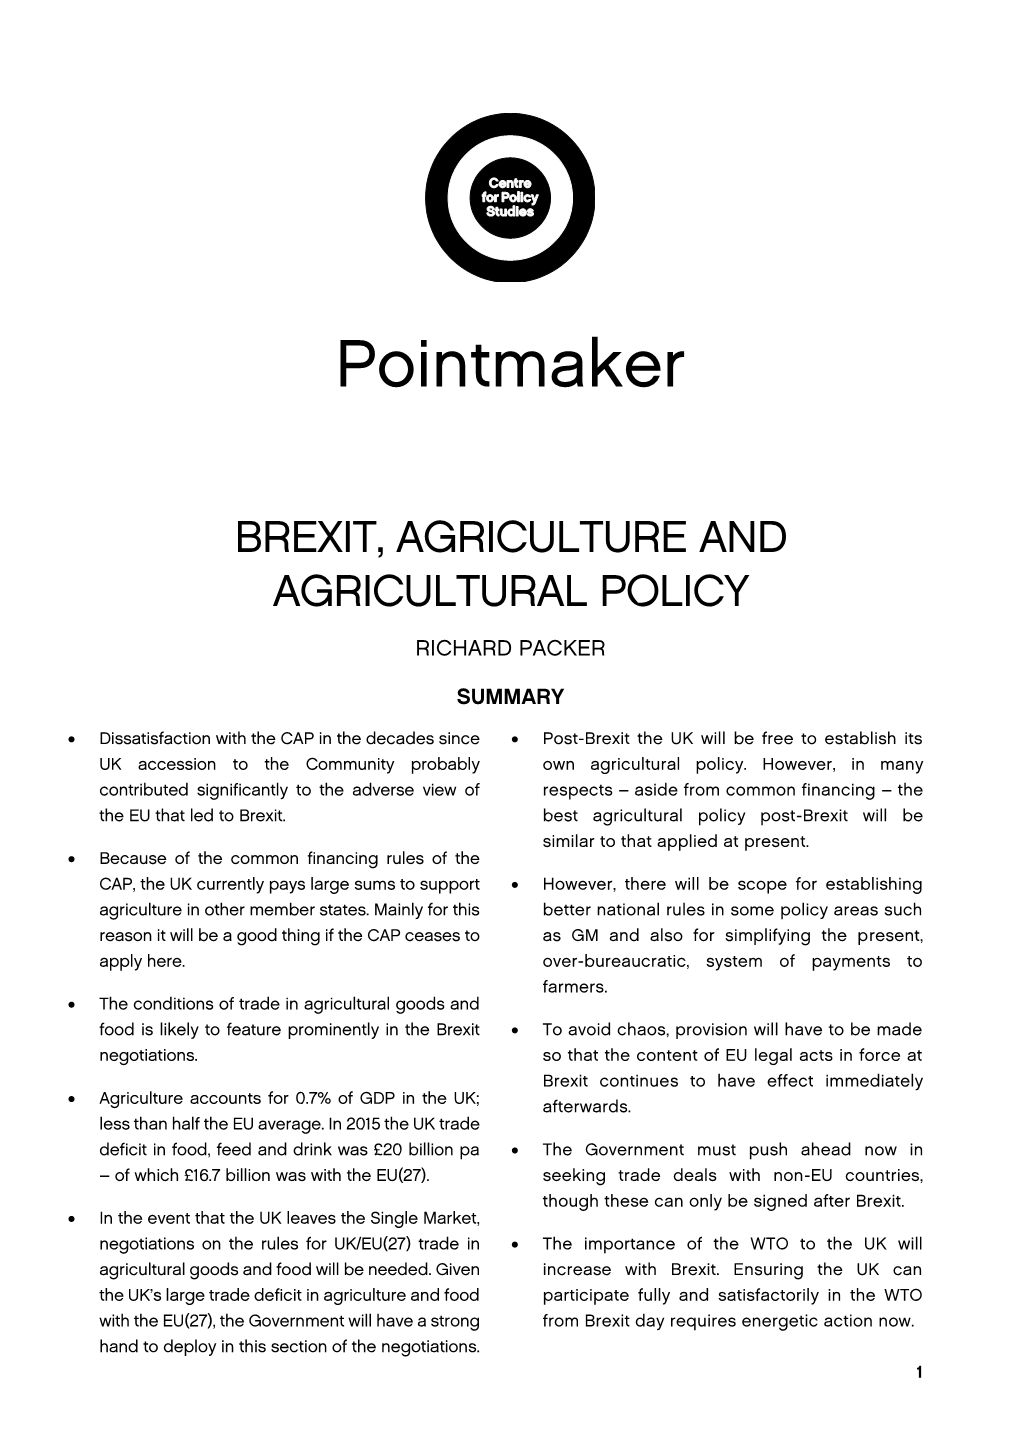 Brexit, Agriculture and Agricultural Policy